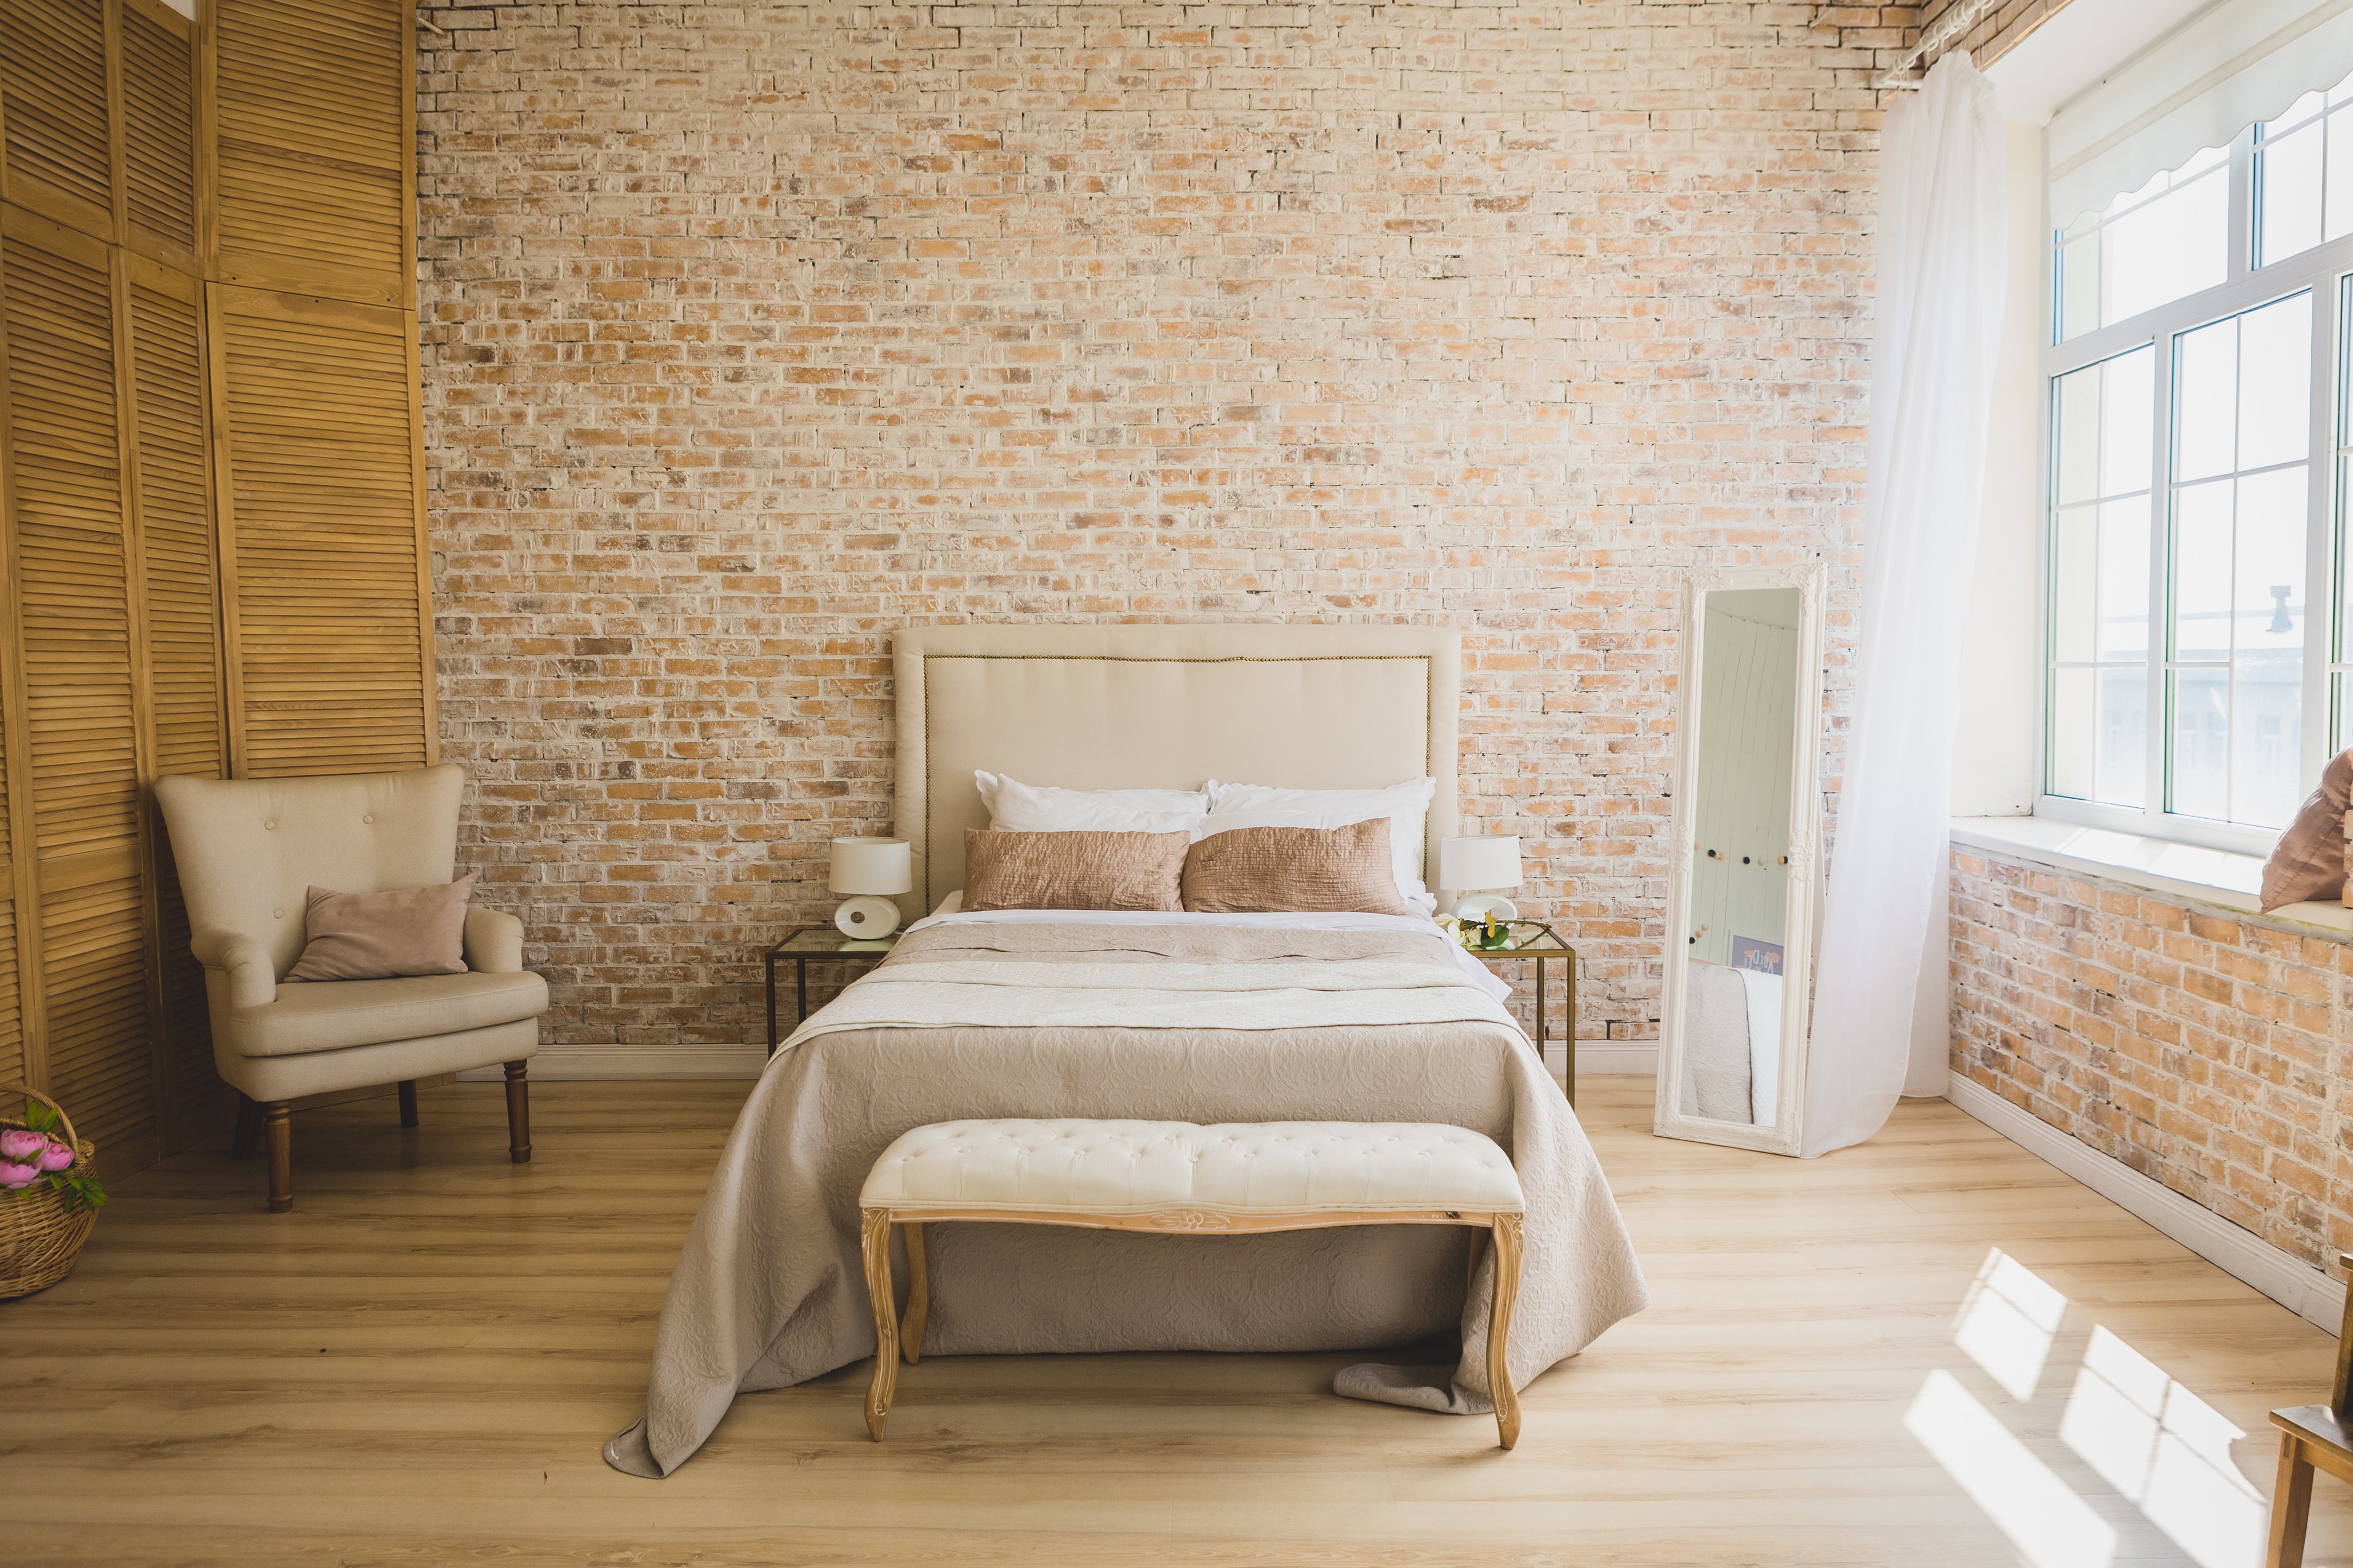 Get Brick Wall Texture with These Exposed Brick Wall Designs